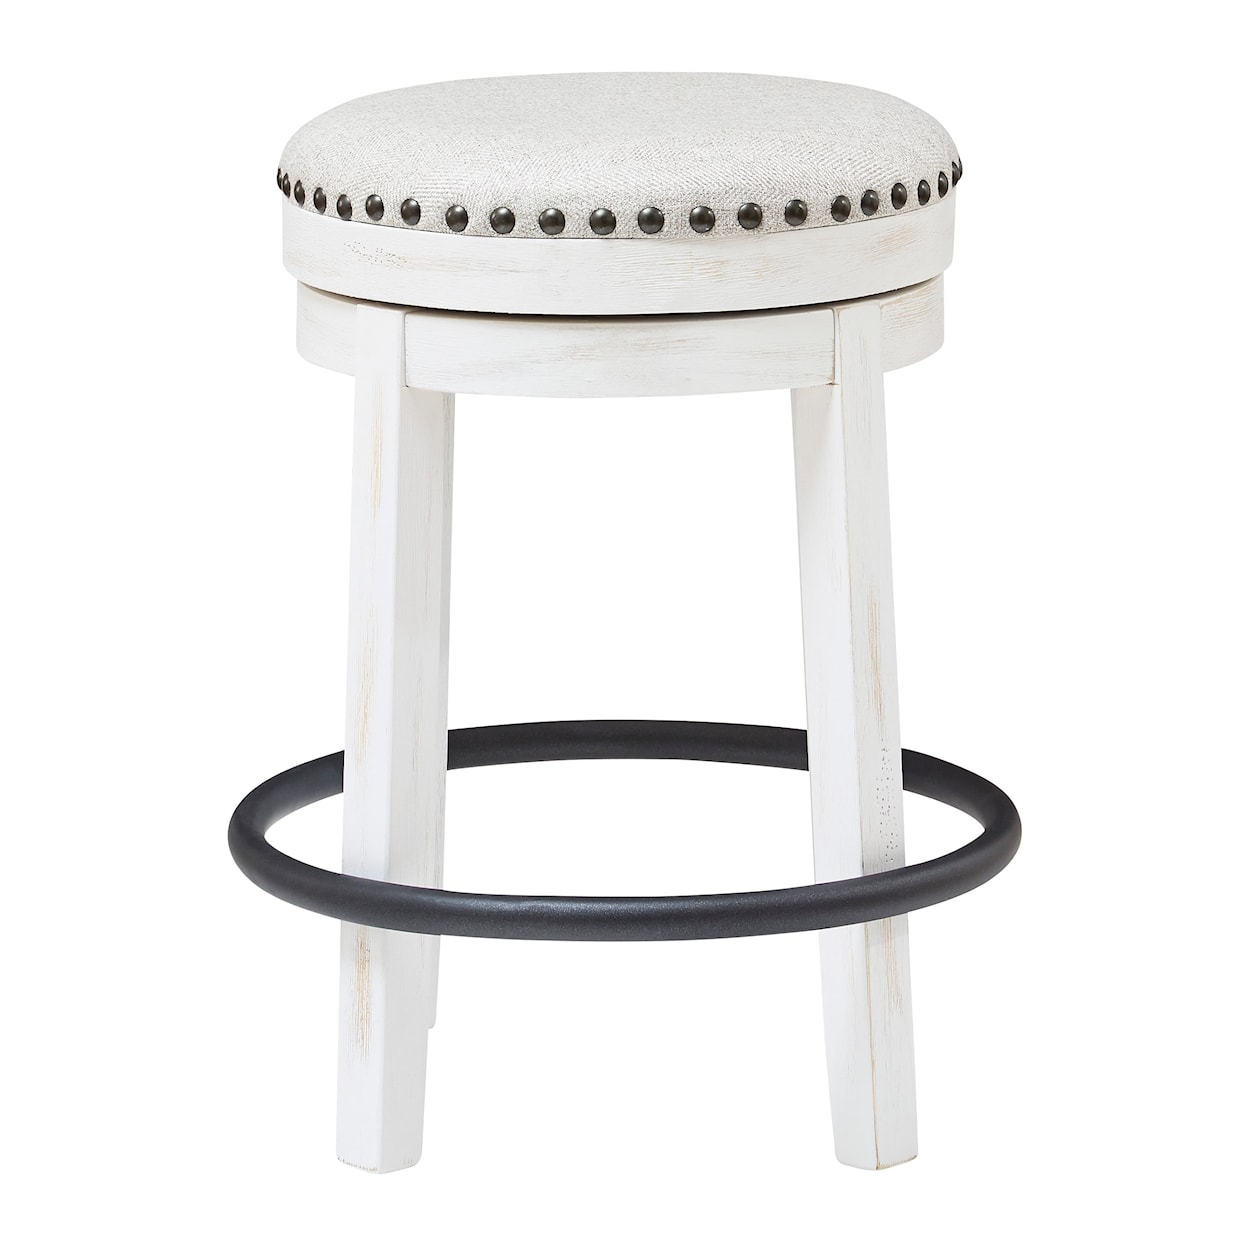 Benchcraft Valebeck Counter Height Stool